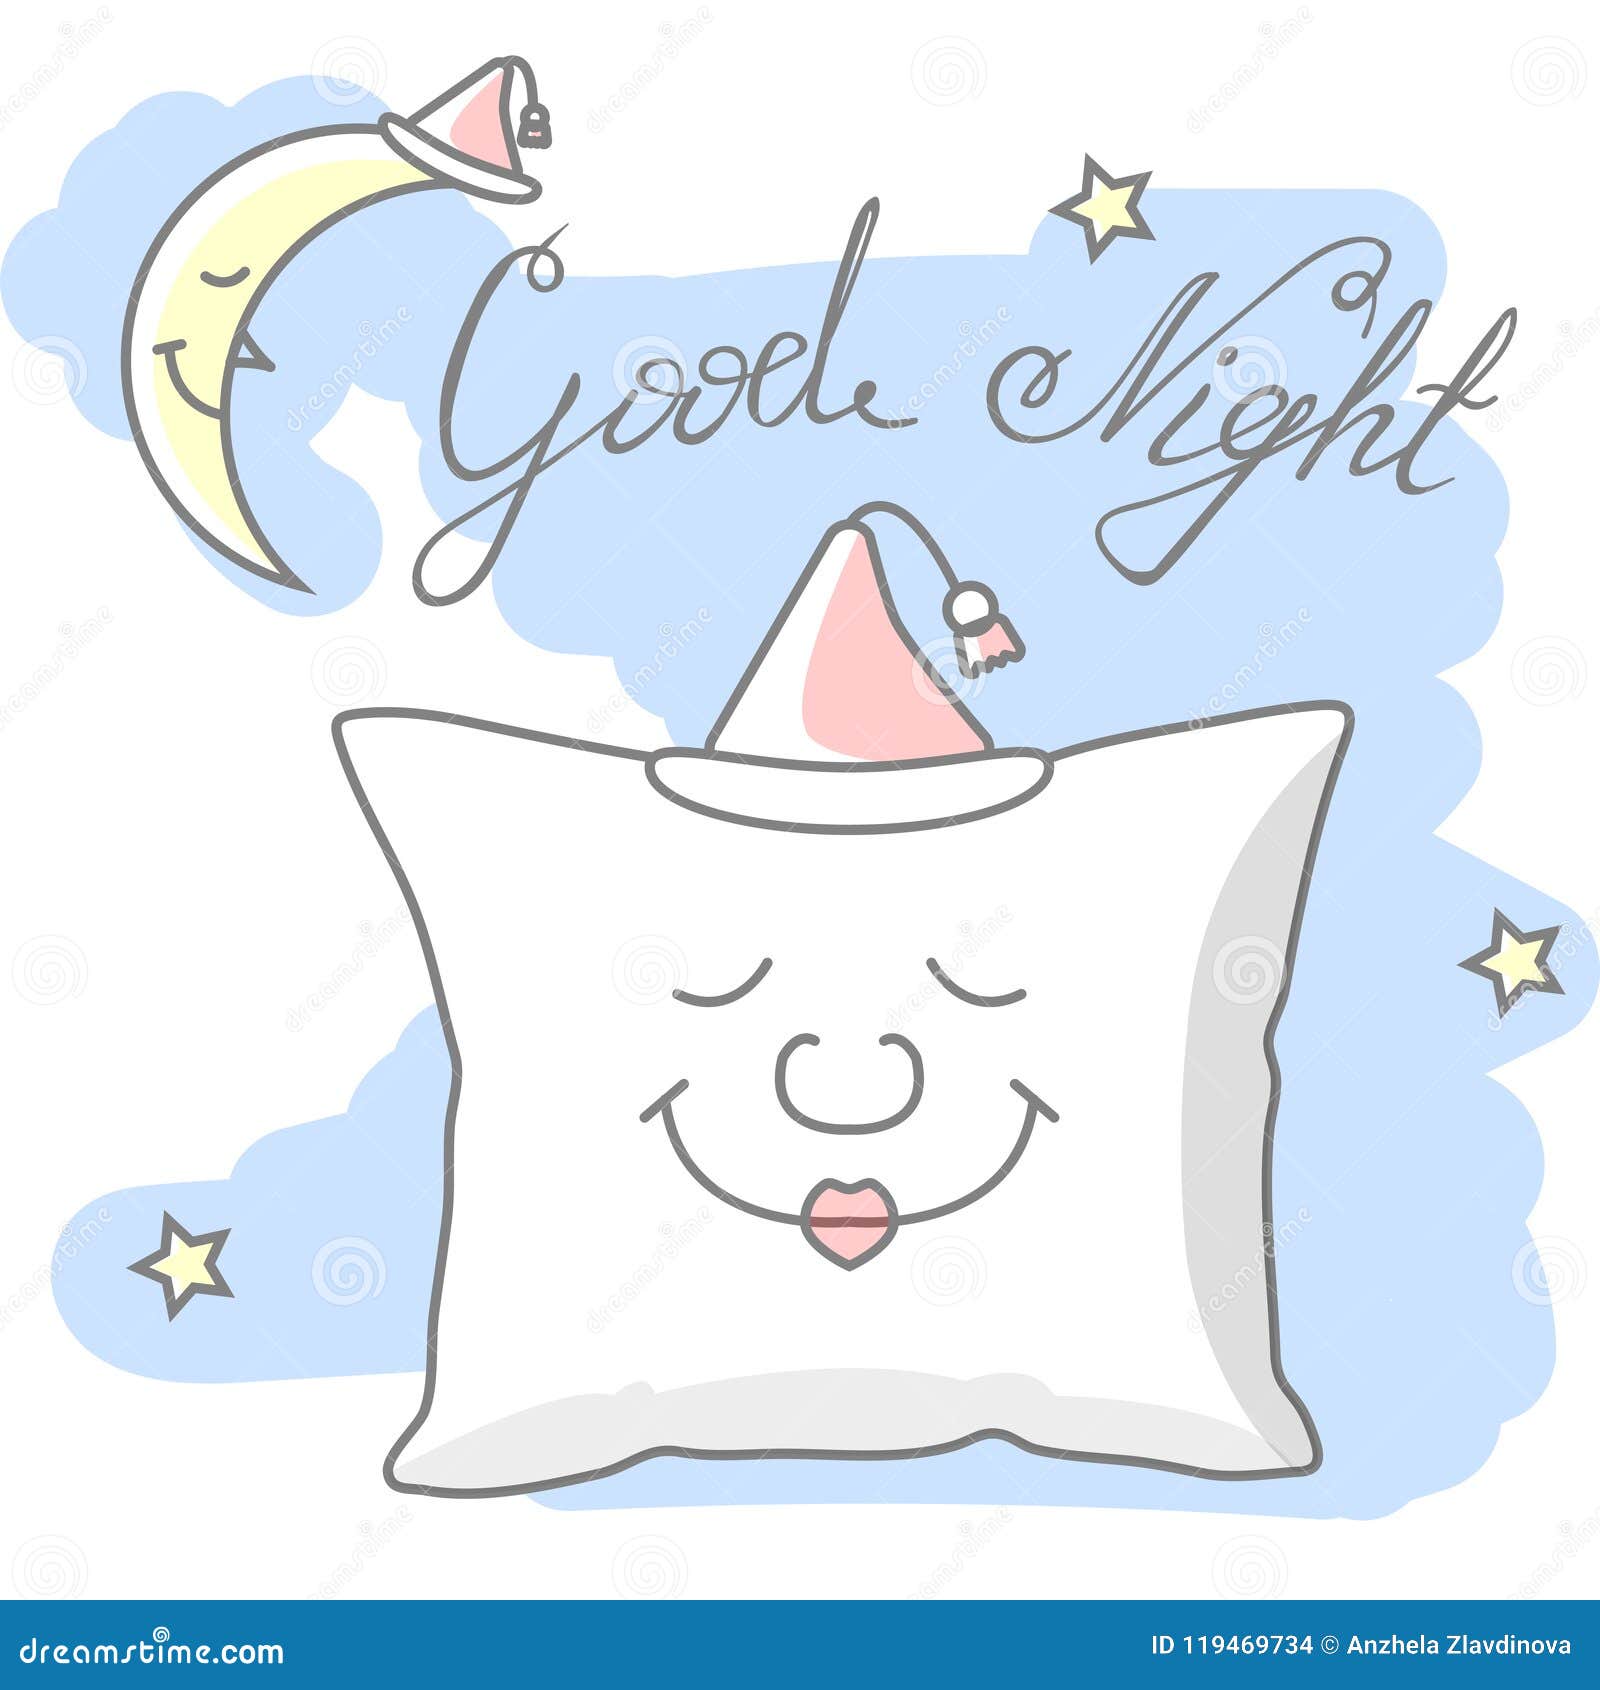 Pillow. Illustration of Good Night Wishes Stock Vector ...